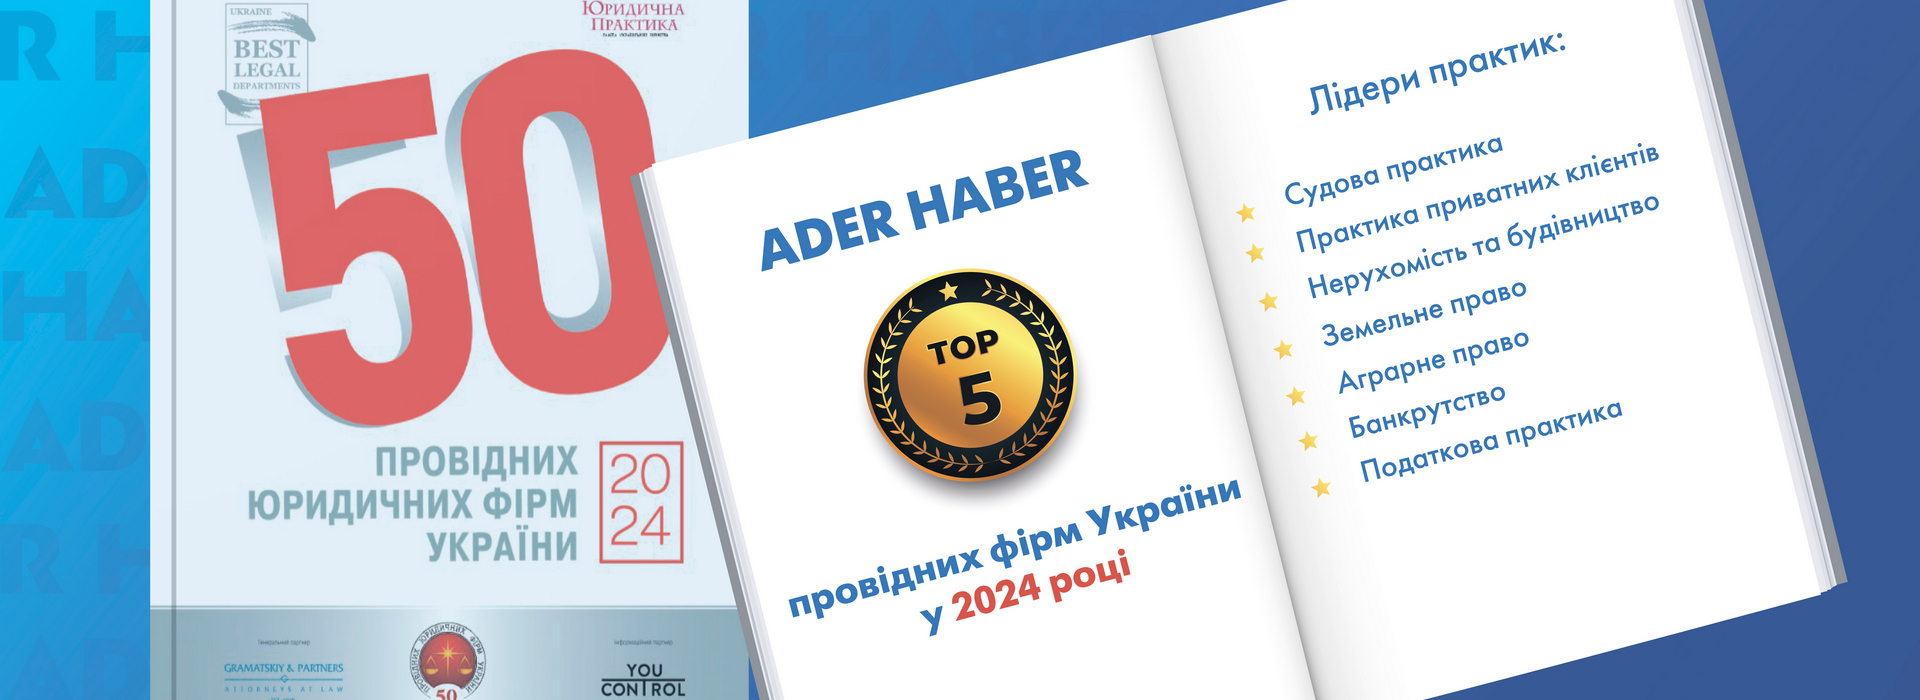 ADER HABER in the Top 5 Leading Law Firms in Ukraine in 2024